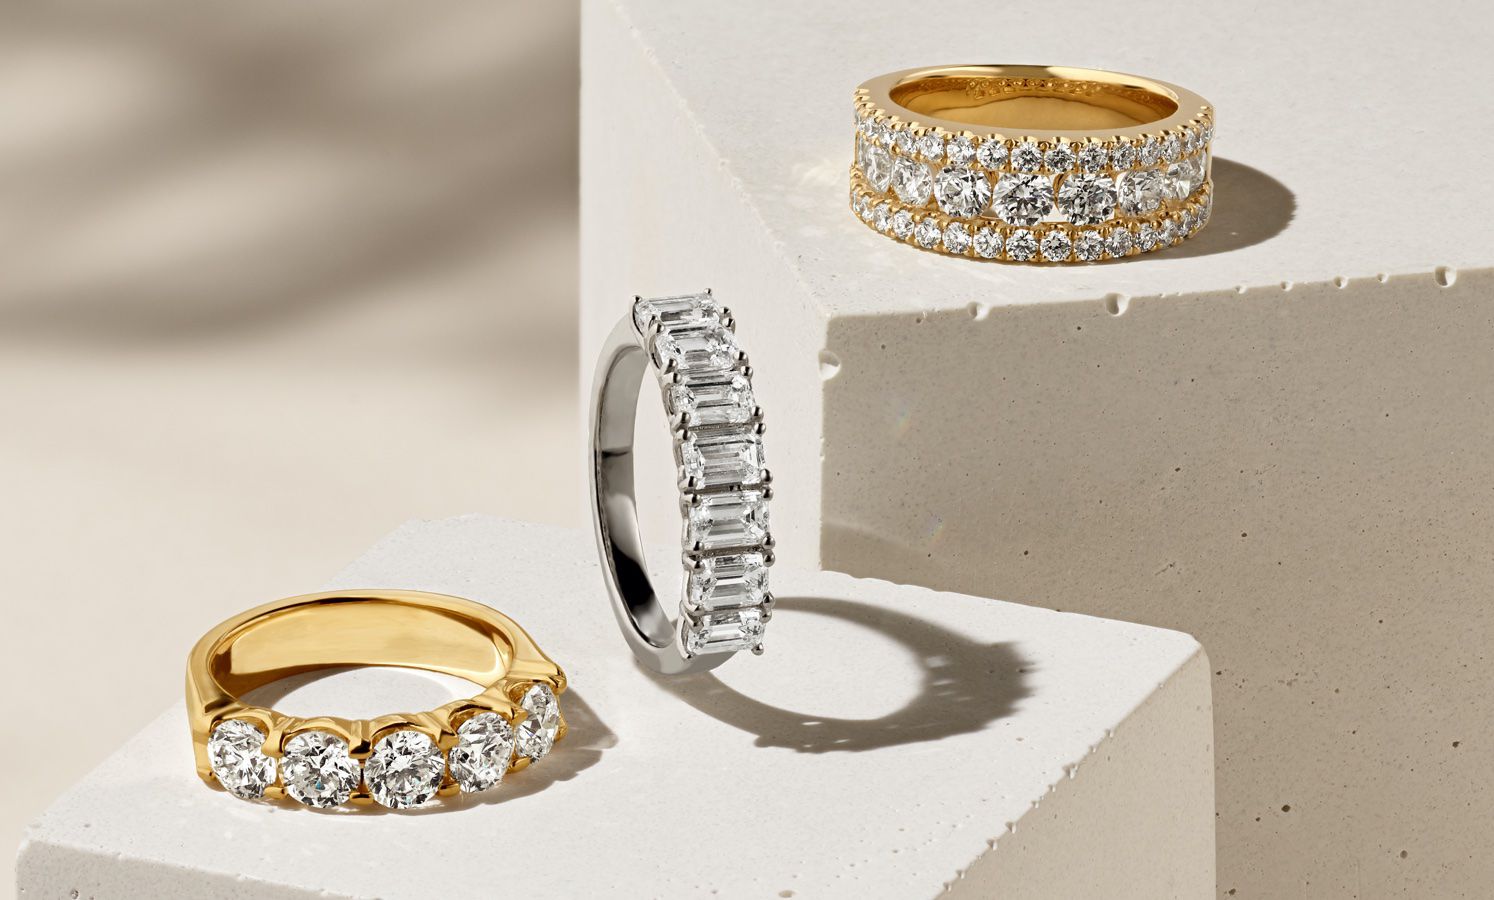 A collection of women's wedding bands